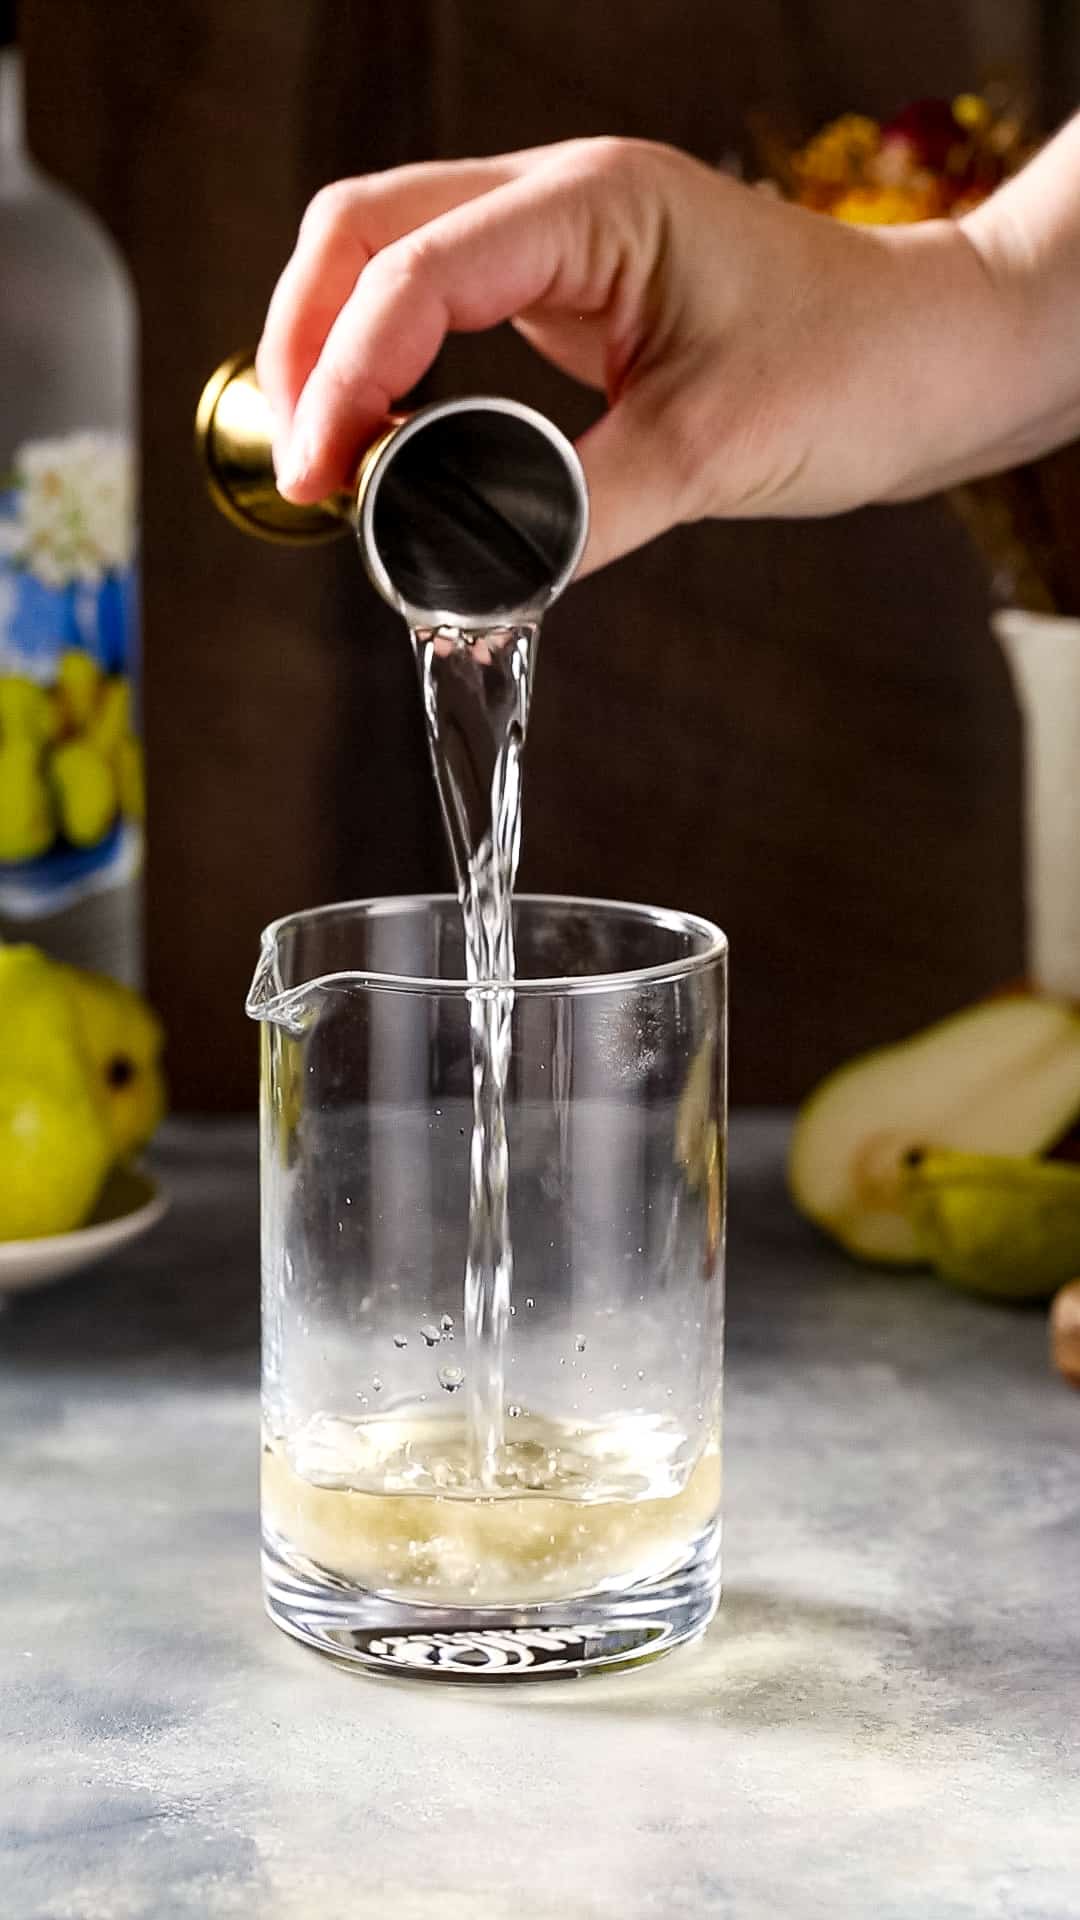 Hand pouring pear flavored vodka into a cocktail mixing glass from a gold jigger.